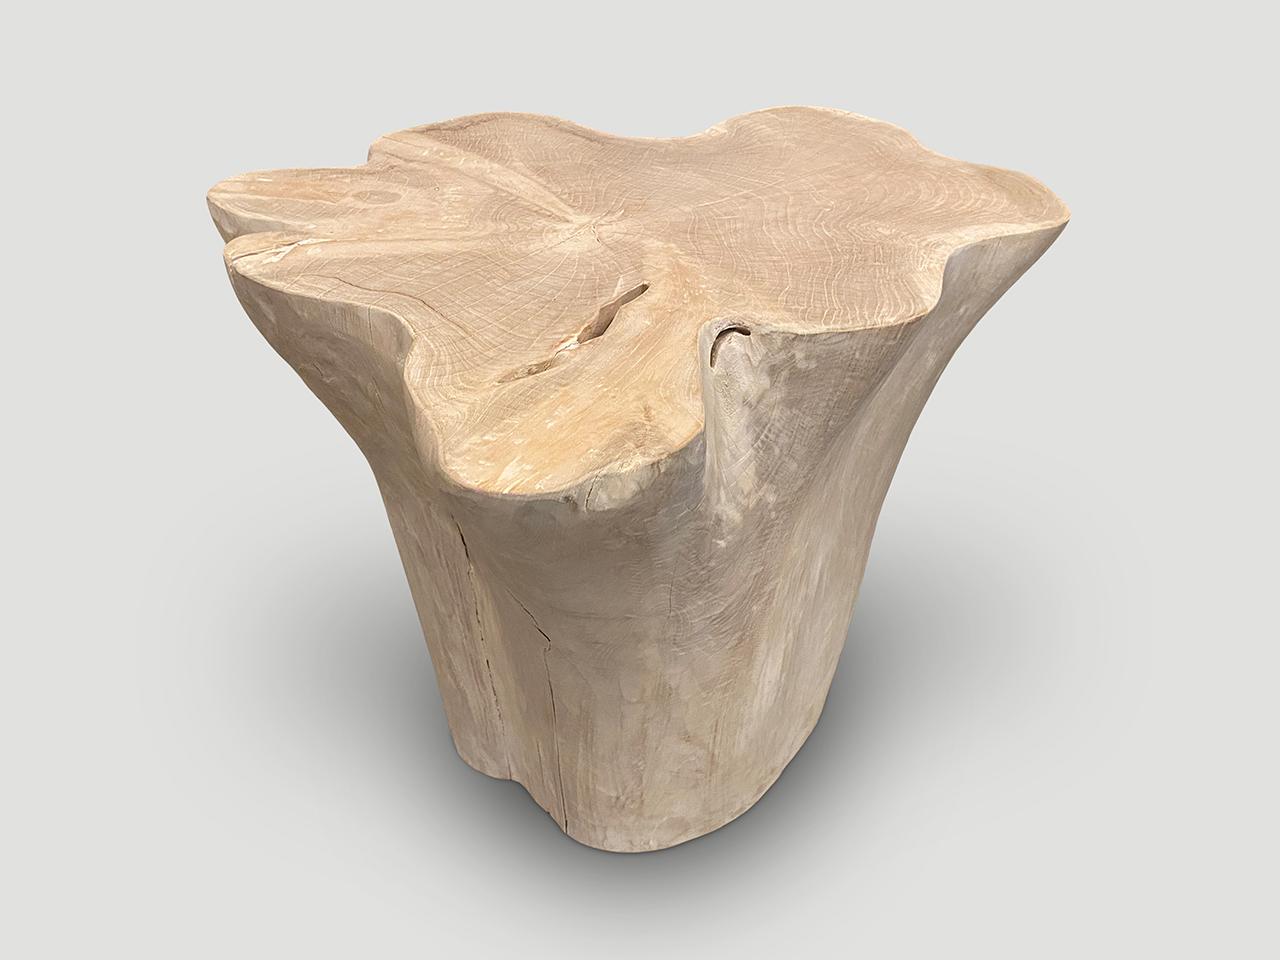 Amorphous reclaimed bleached teak side table or pedestal. A graduation from the bottom to the top at 13.5